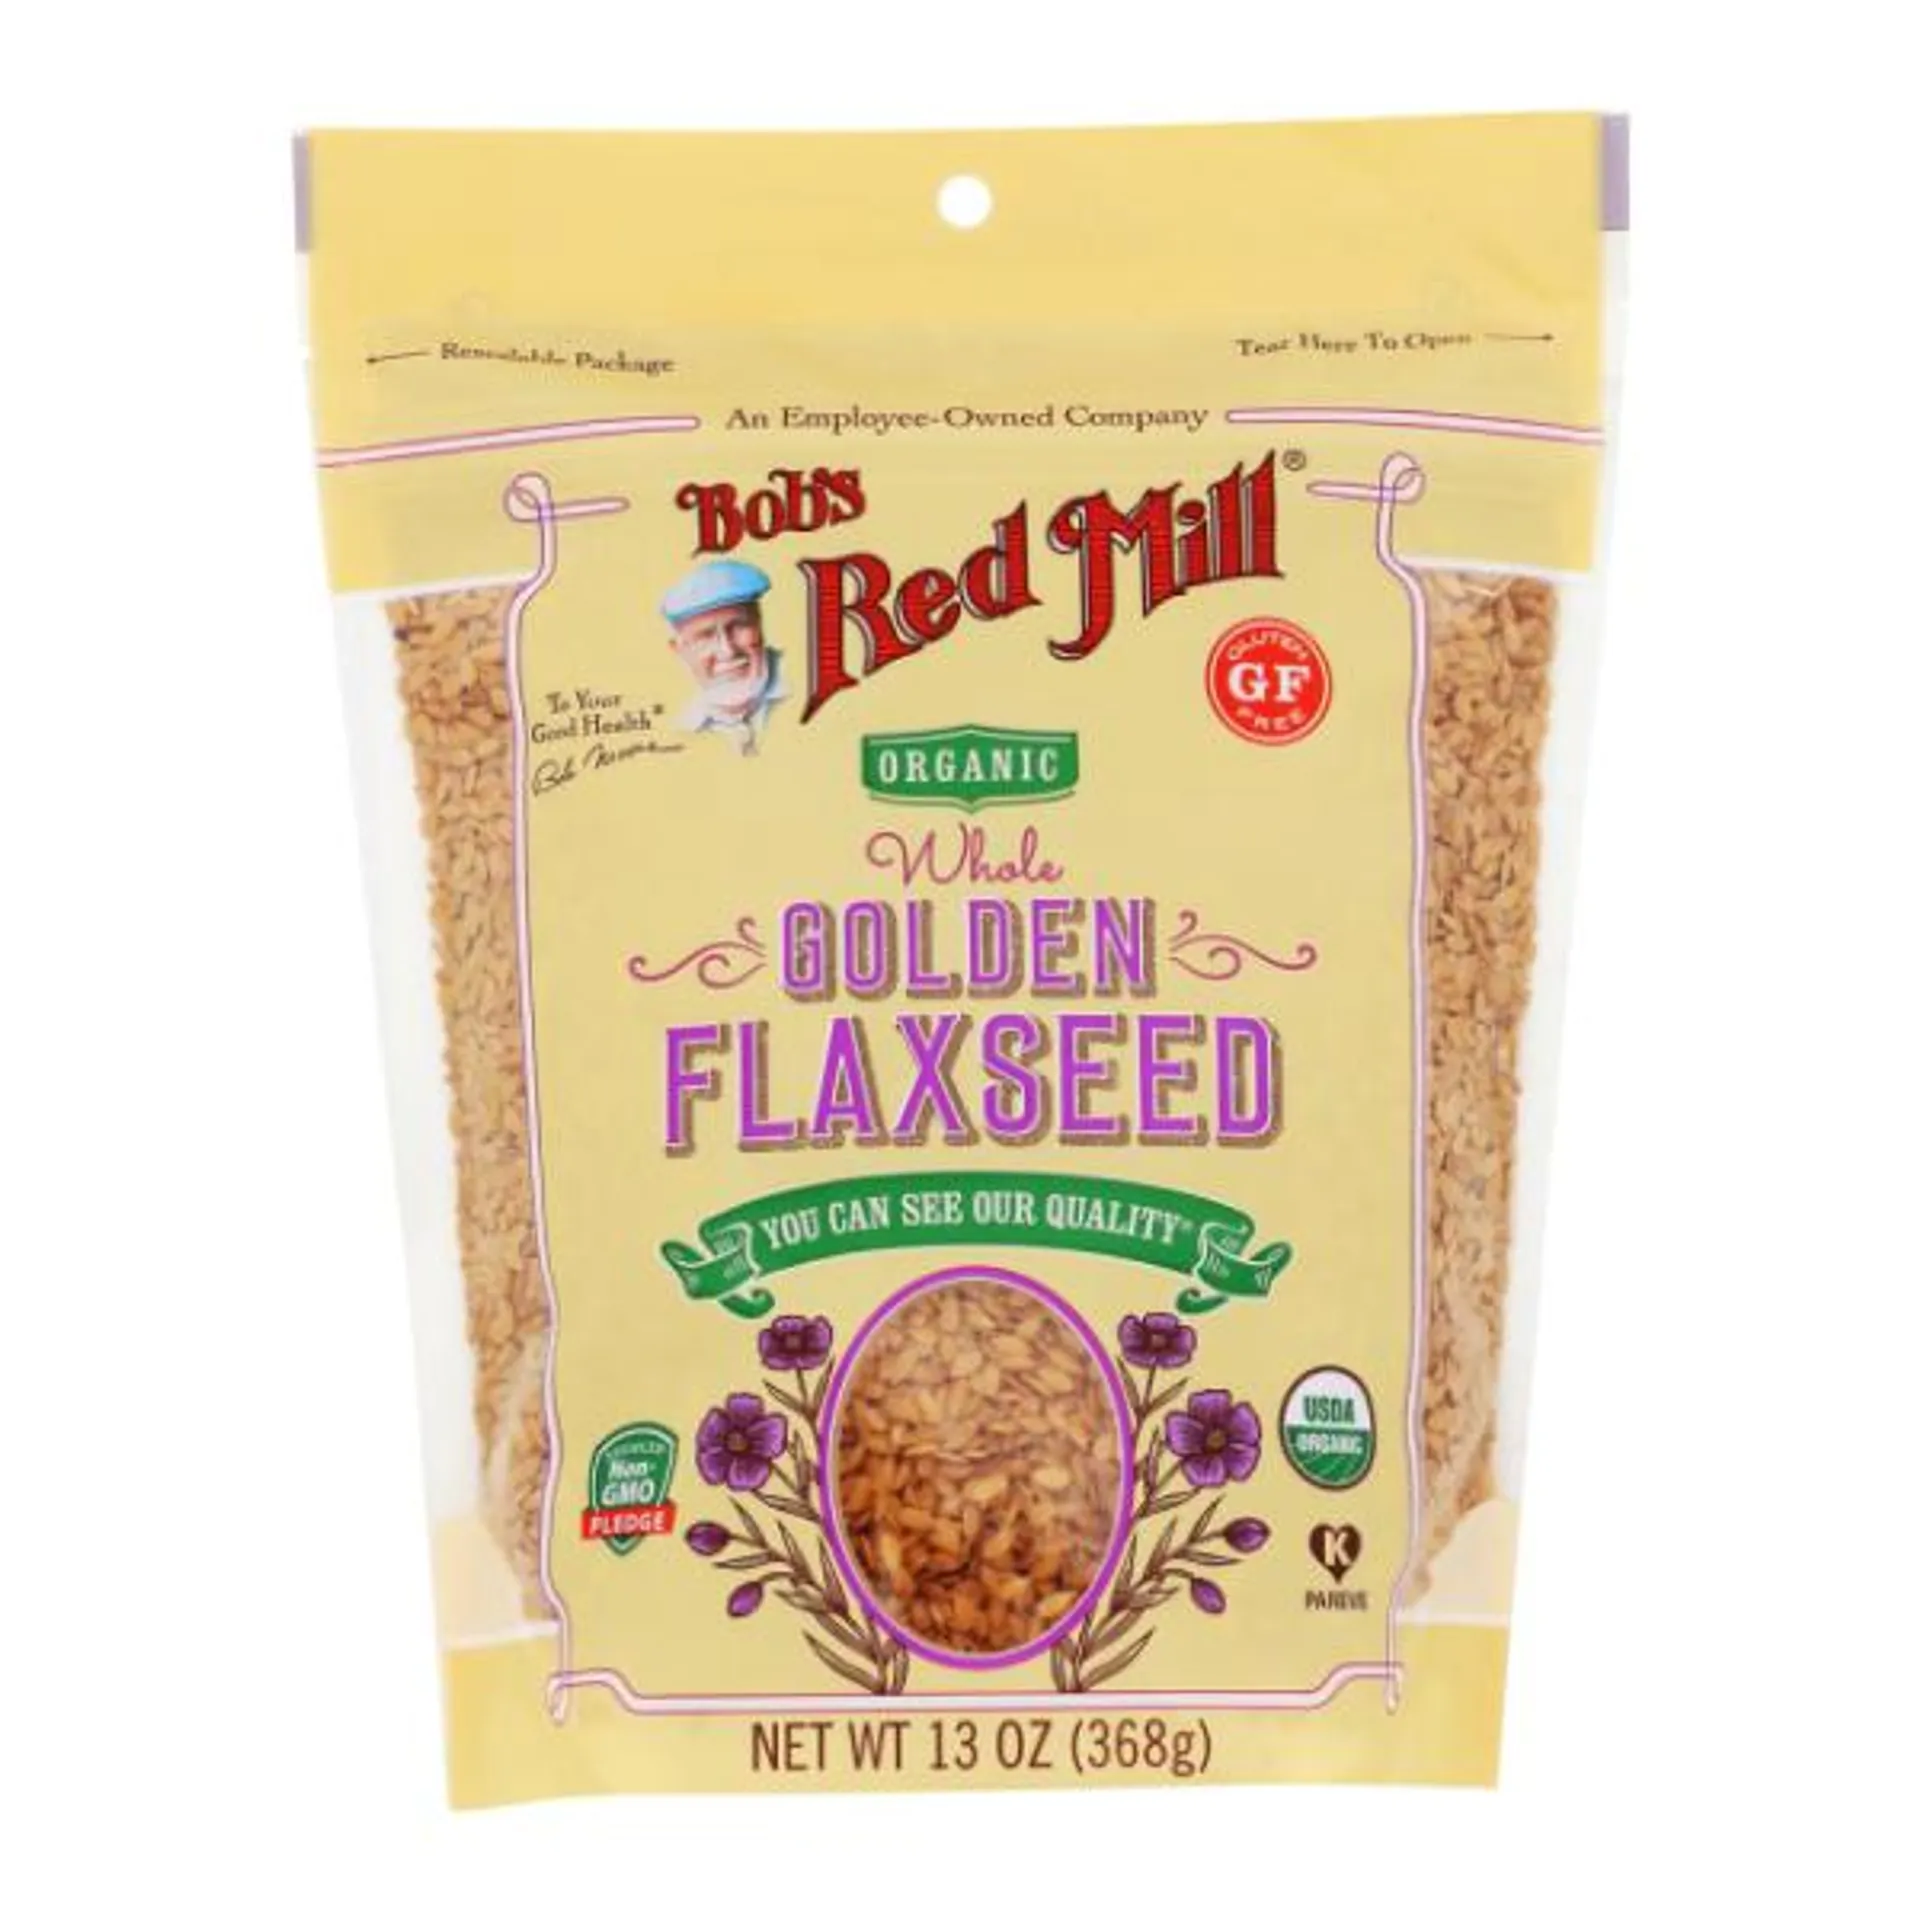 Bob's Red Mill Organic Whole Golden Flaxseed - 13 Ounce